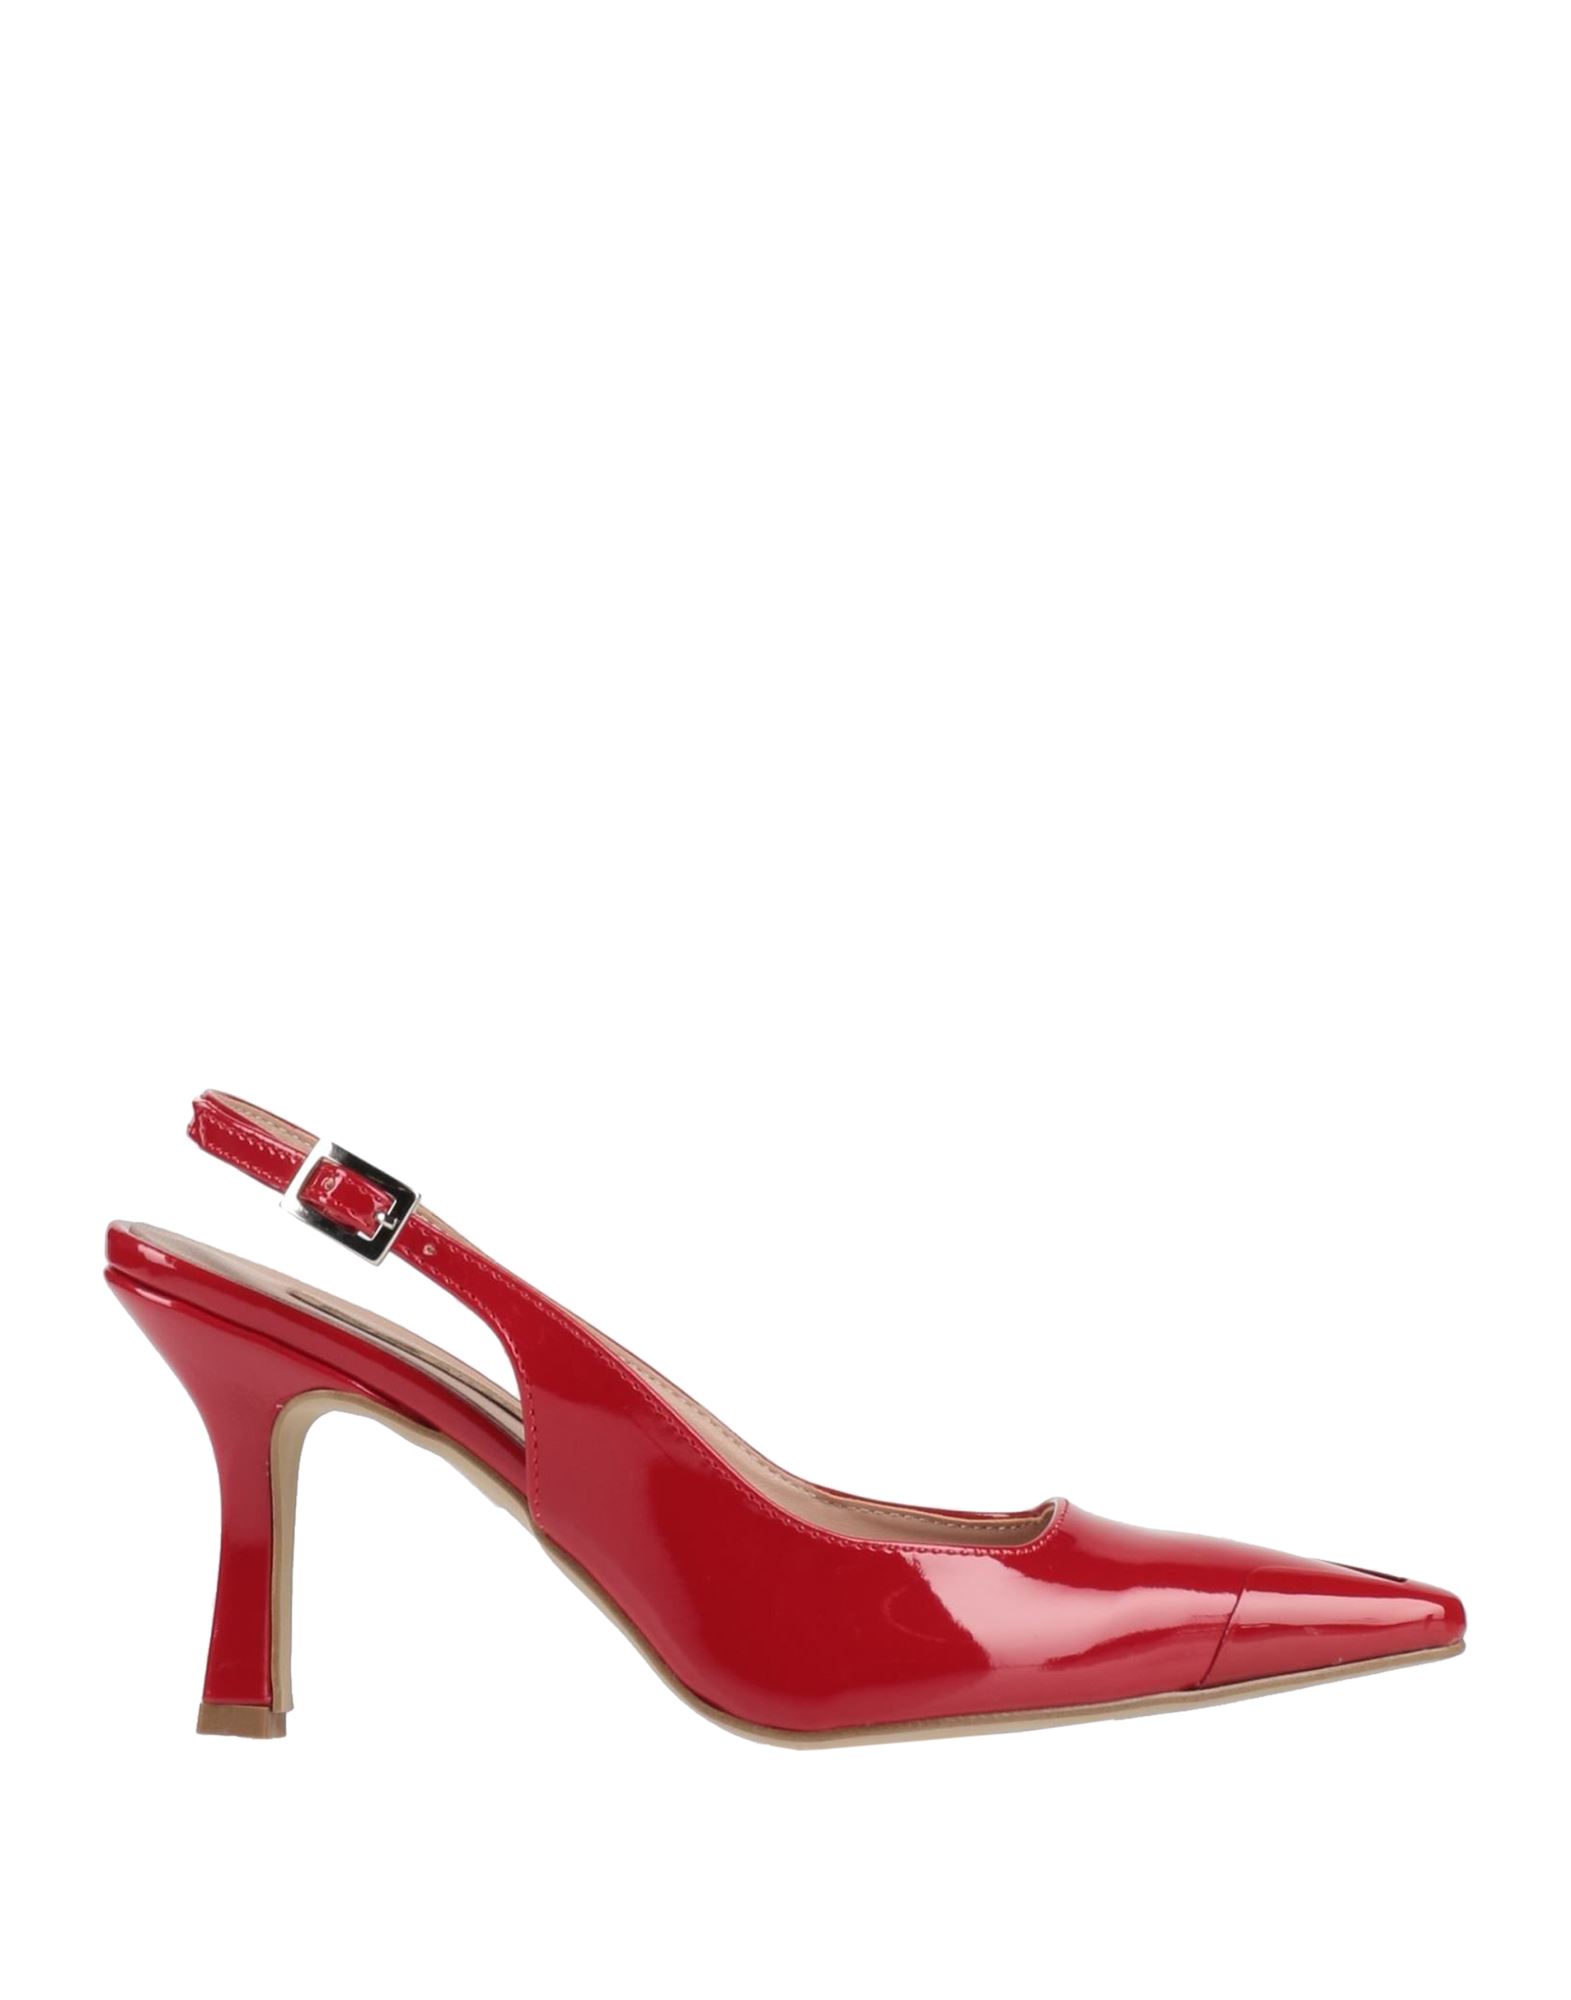 06 Milano Pumps In Red